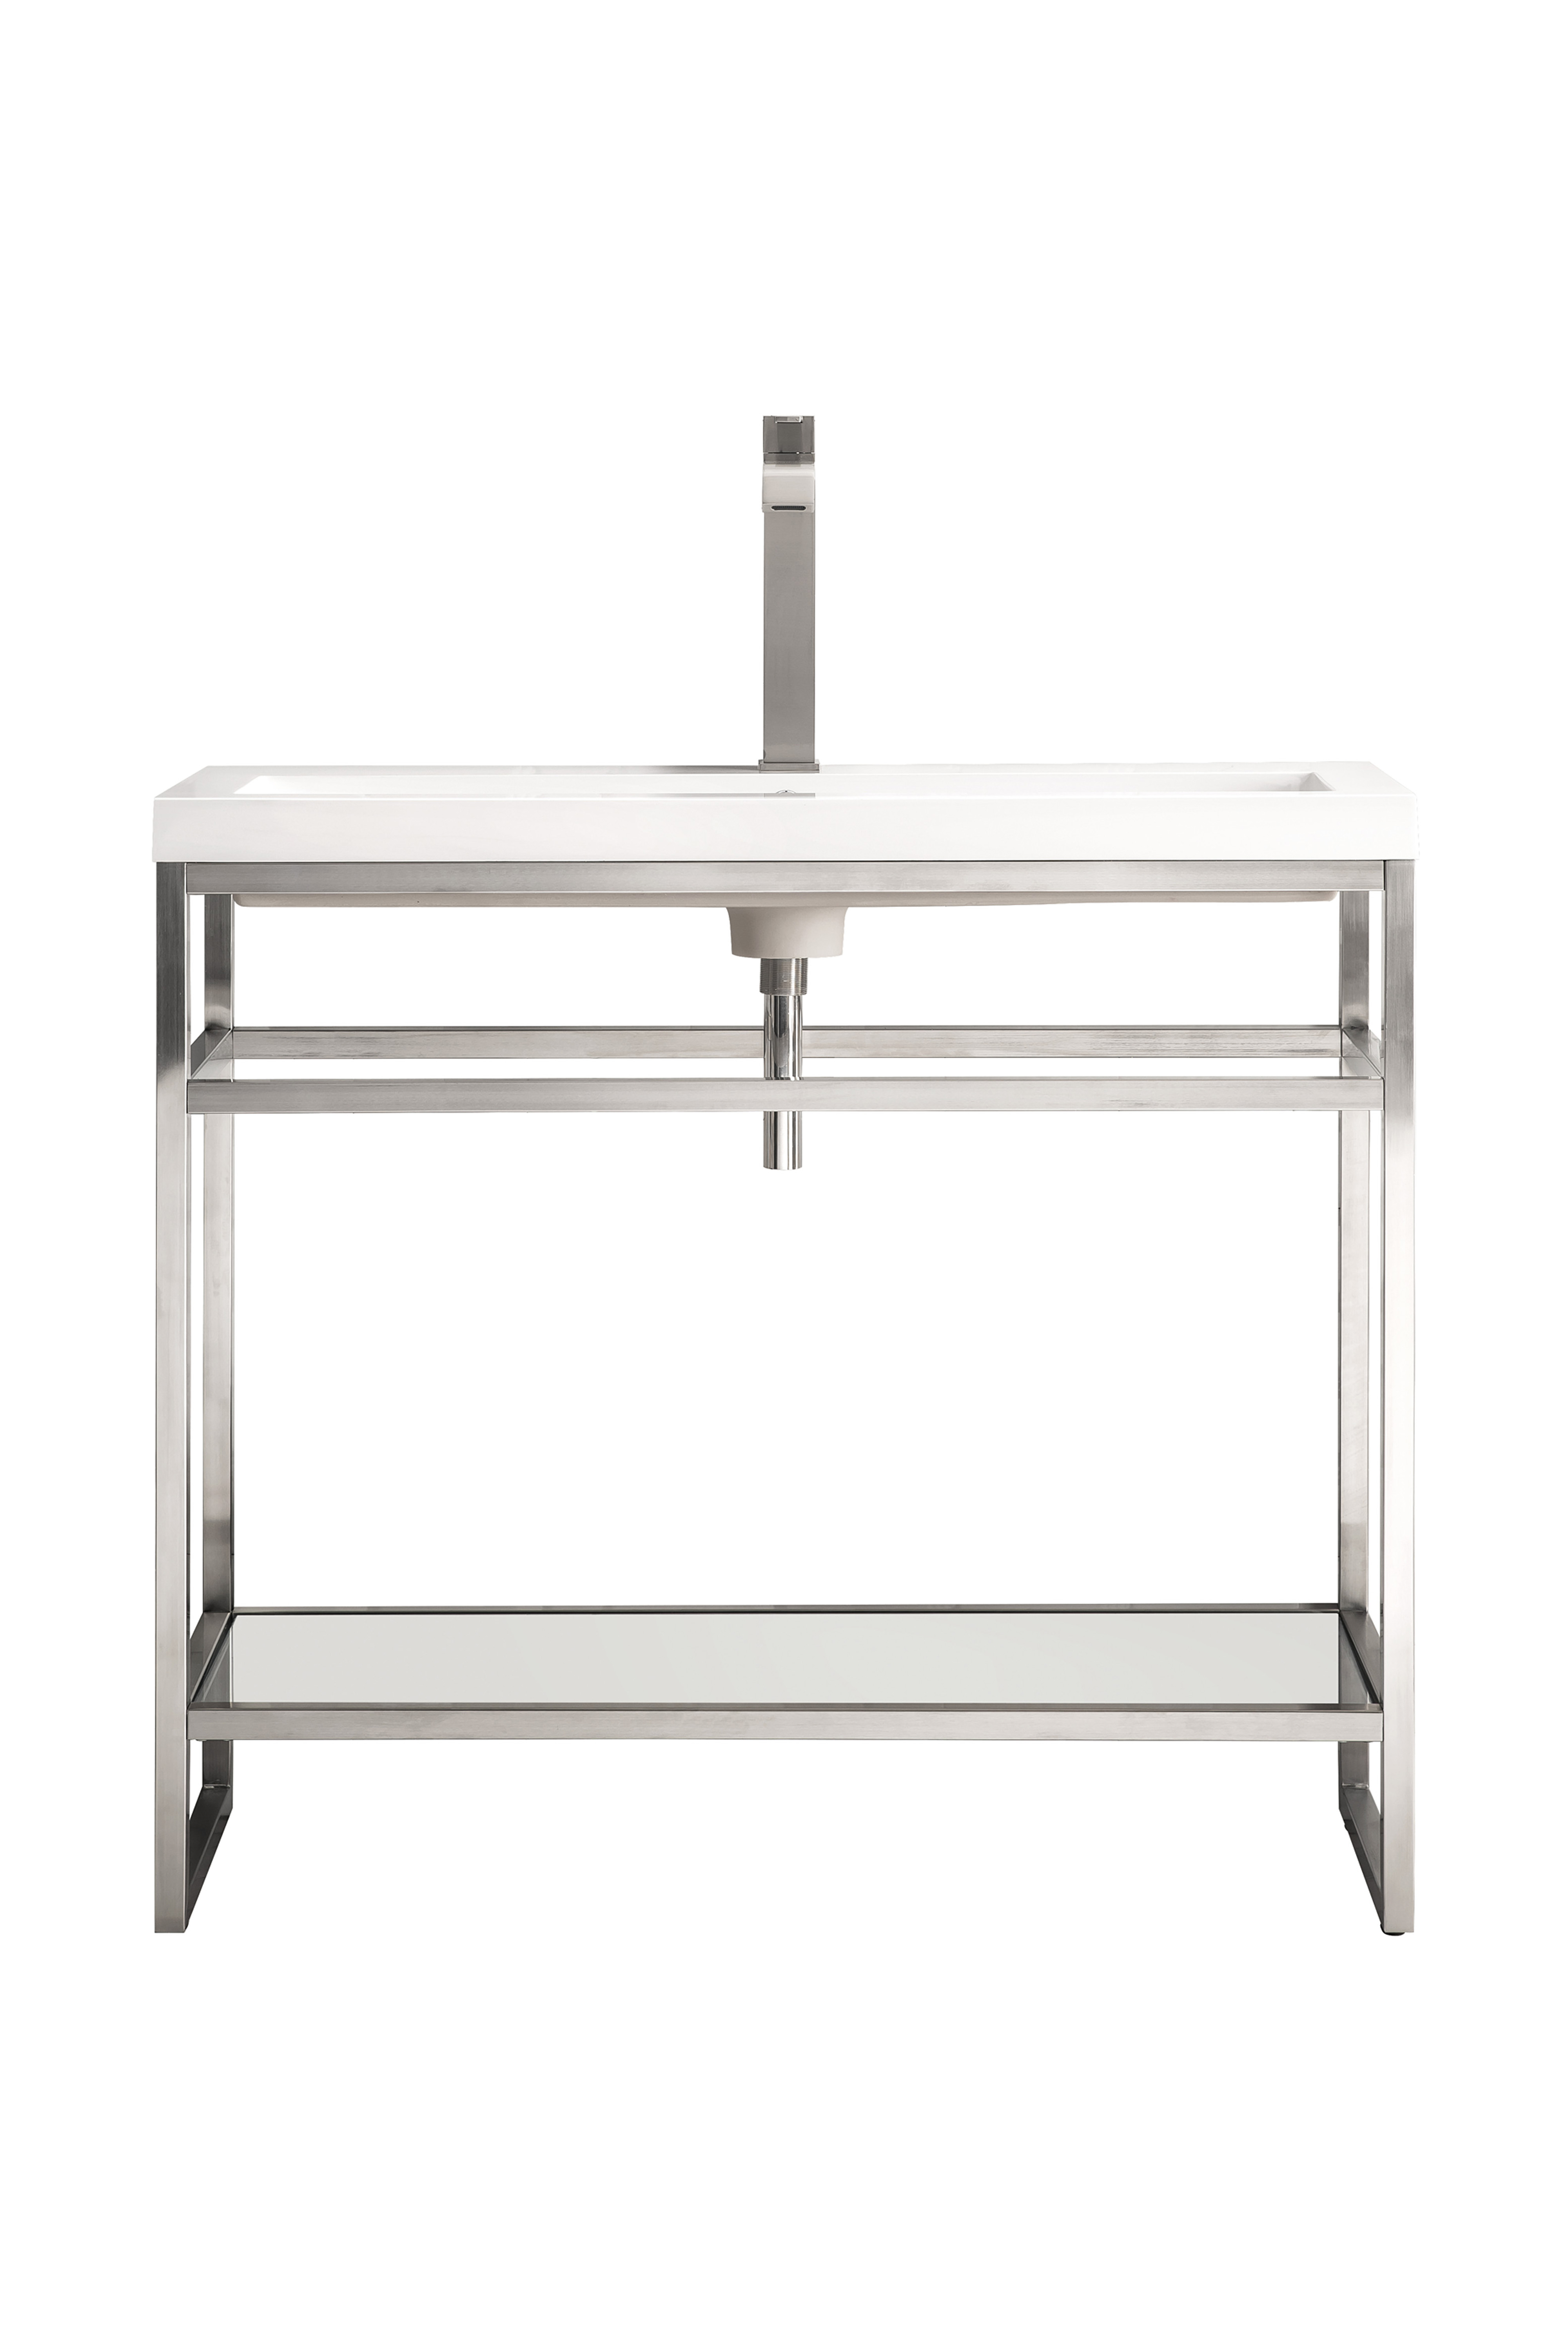 James Martin C105V39.5BNKWG Boston 39.5" Stainless Steel Sink Console, Brushed Nickel w/ White Glossy Composite Countertop